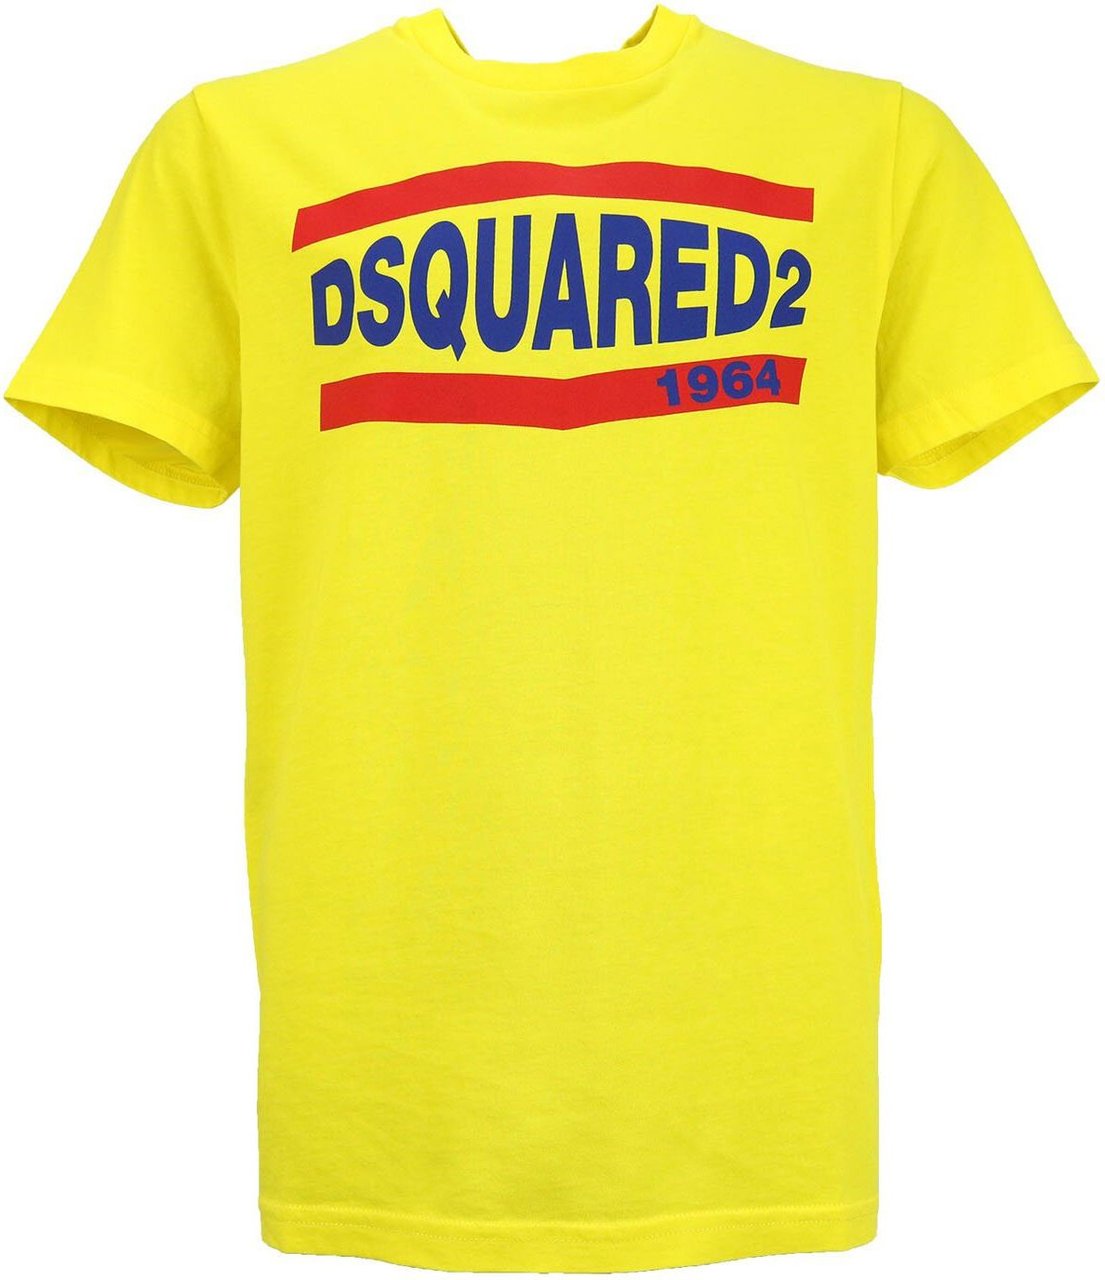 Dsquared2 Shirt 1964 Geel Relax Fit Geel